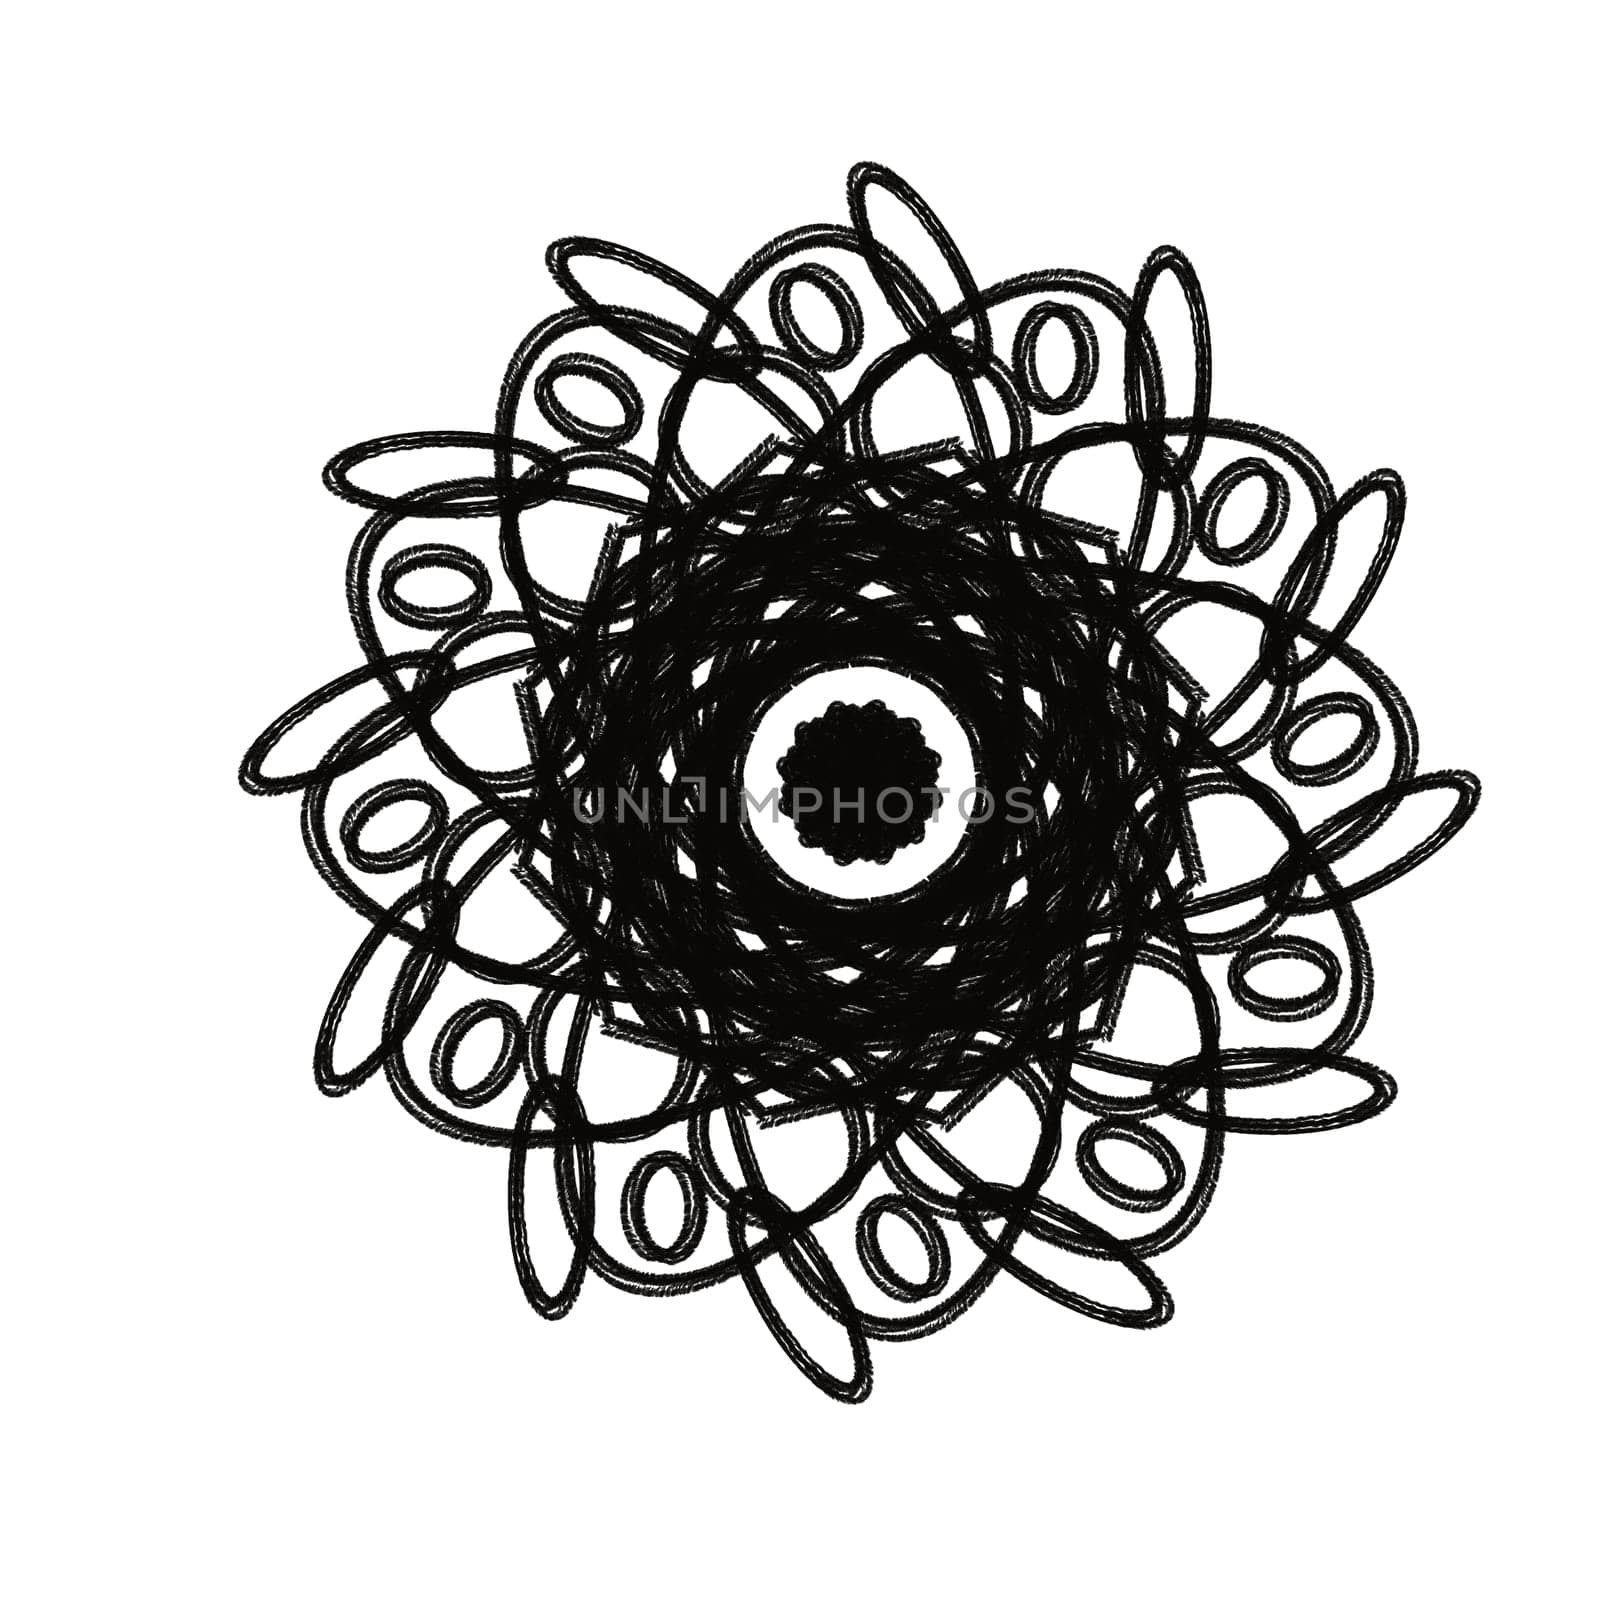 Black and White Hand Drawn Mandala for Coloring Pages, Coloring Books and Coloring Sheets. Floral Ornament Design Template. Ethnic, Swirl Pattern, Flower Isolated Object. Antistress for Kids, Childrens and Adults.